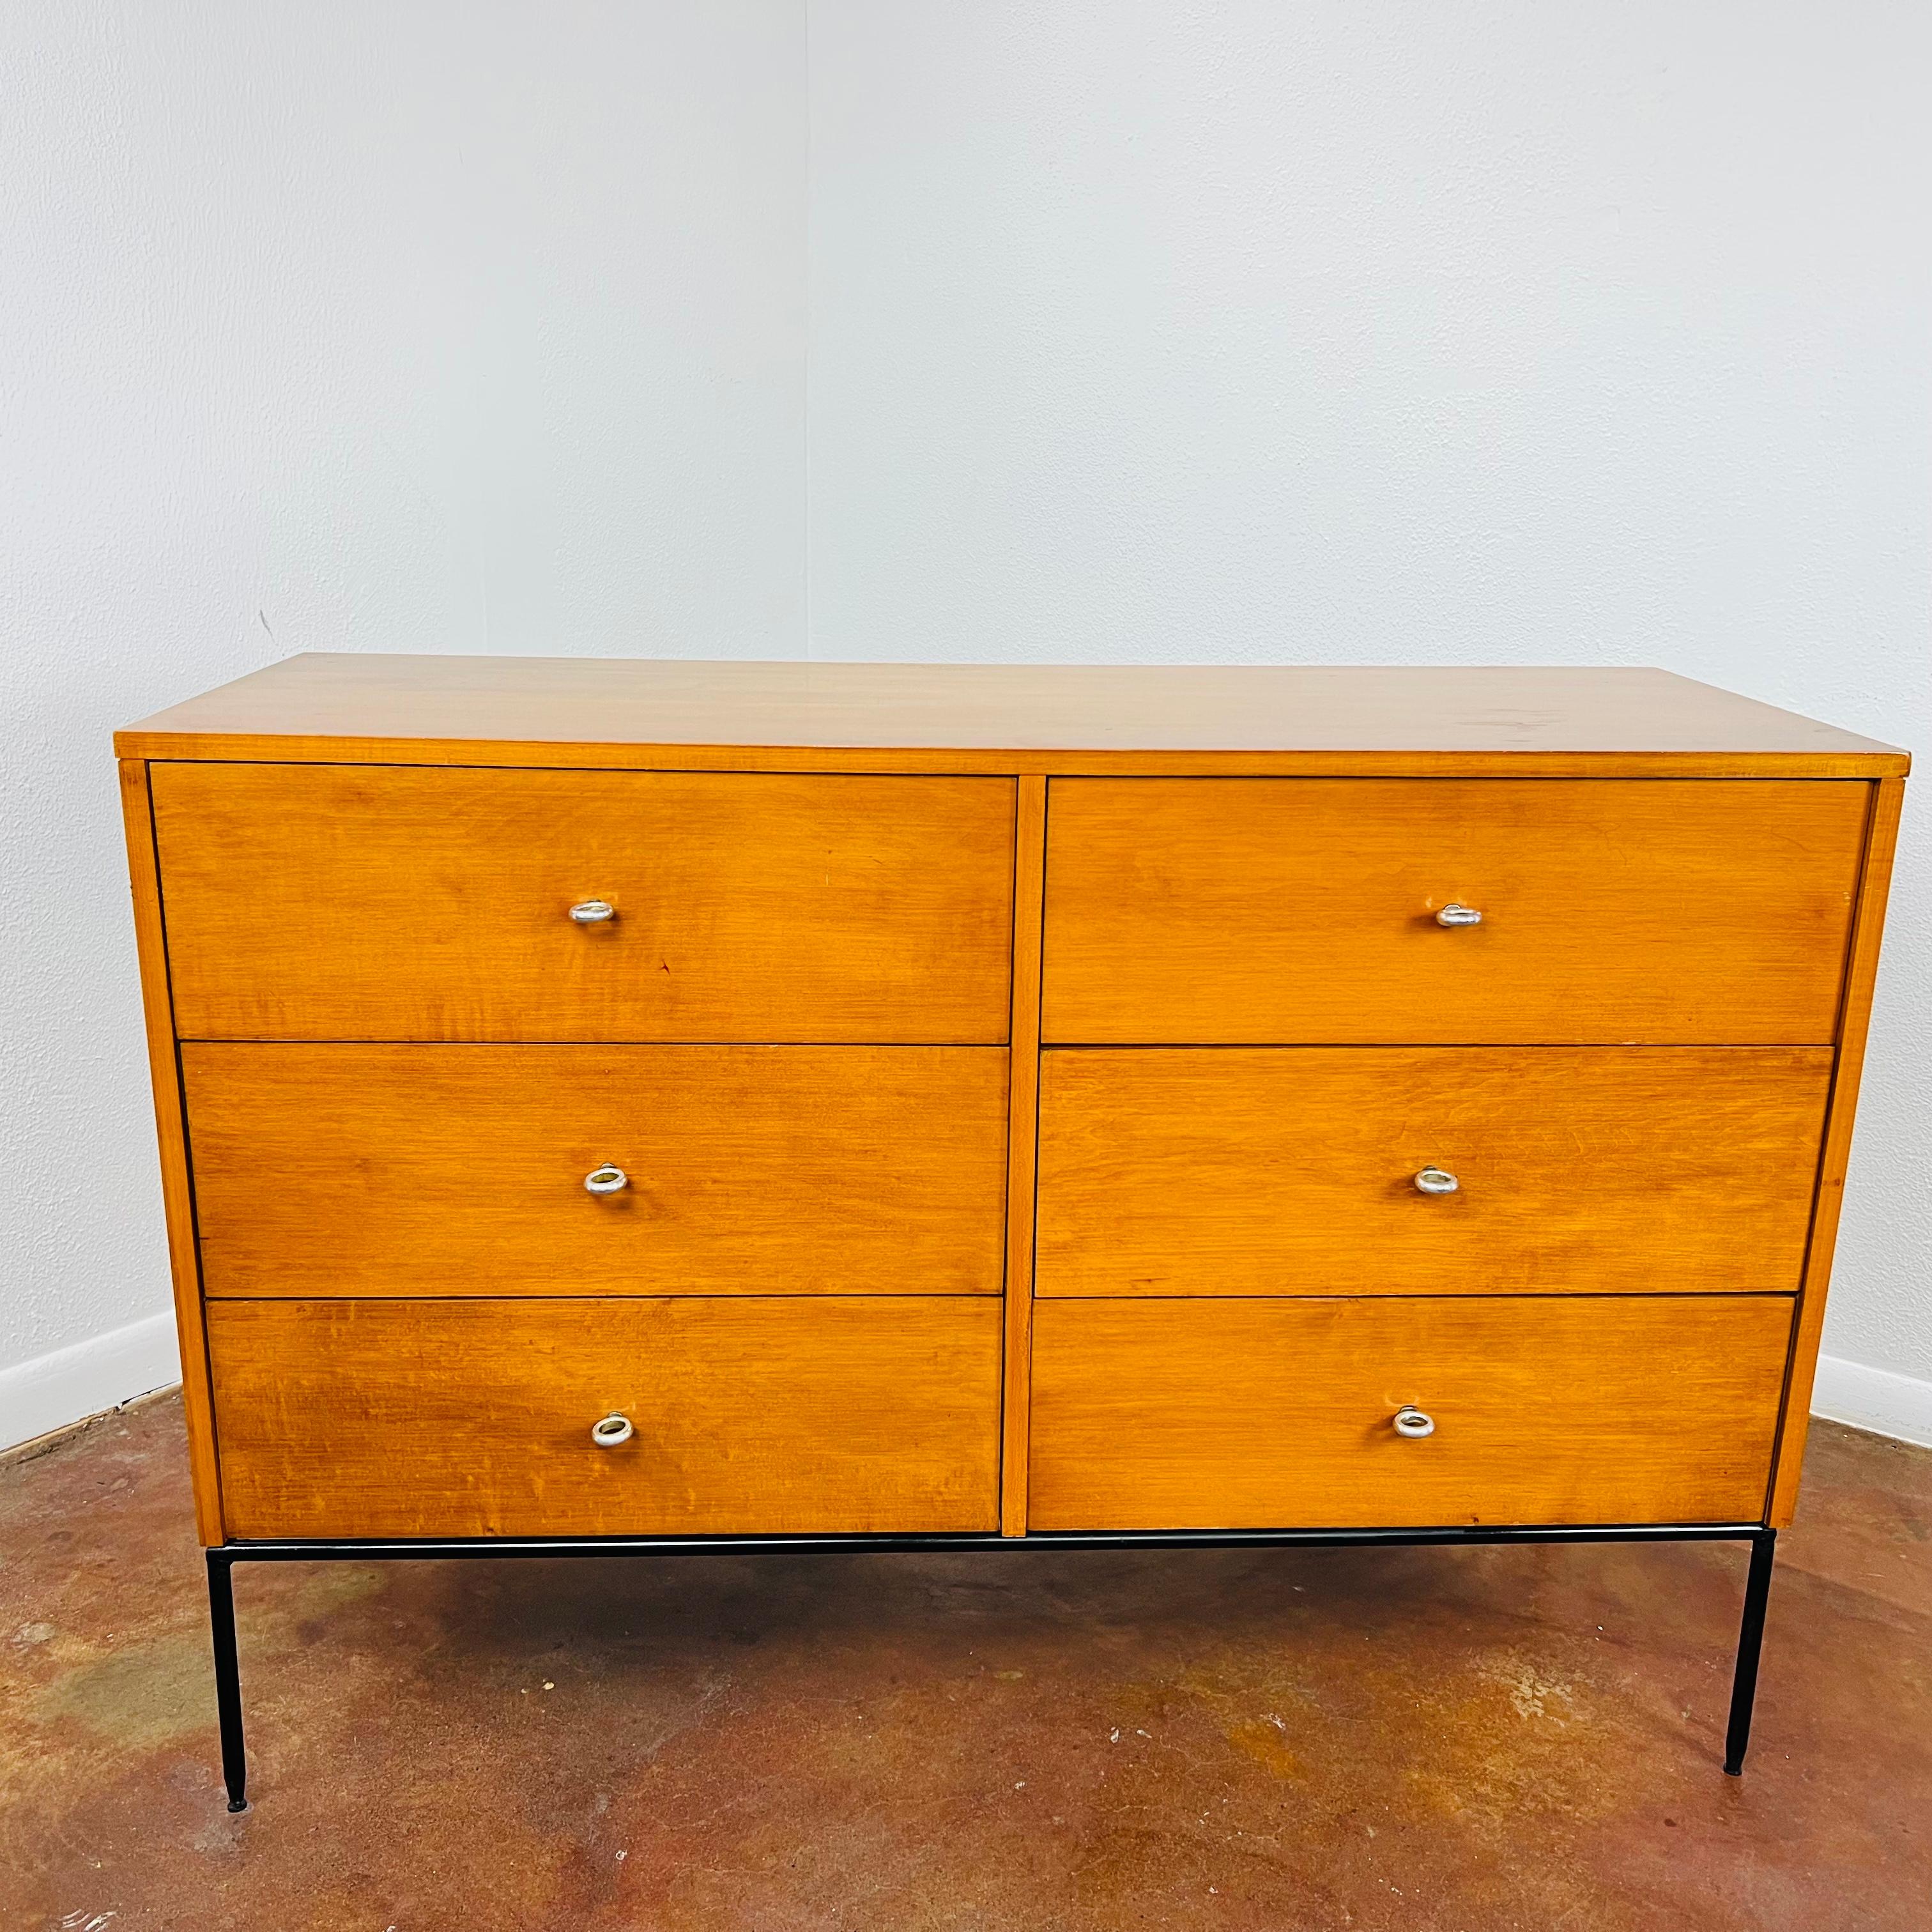 Timeless mid-century modern 6 drawer dresser designed by Paul McCobb for Winchendon Furniture, circa 1950s. Maple wood construction sits on a black iron base and is stamped on interior of drawer with the designer and manufacturer signatures.